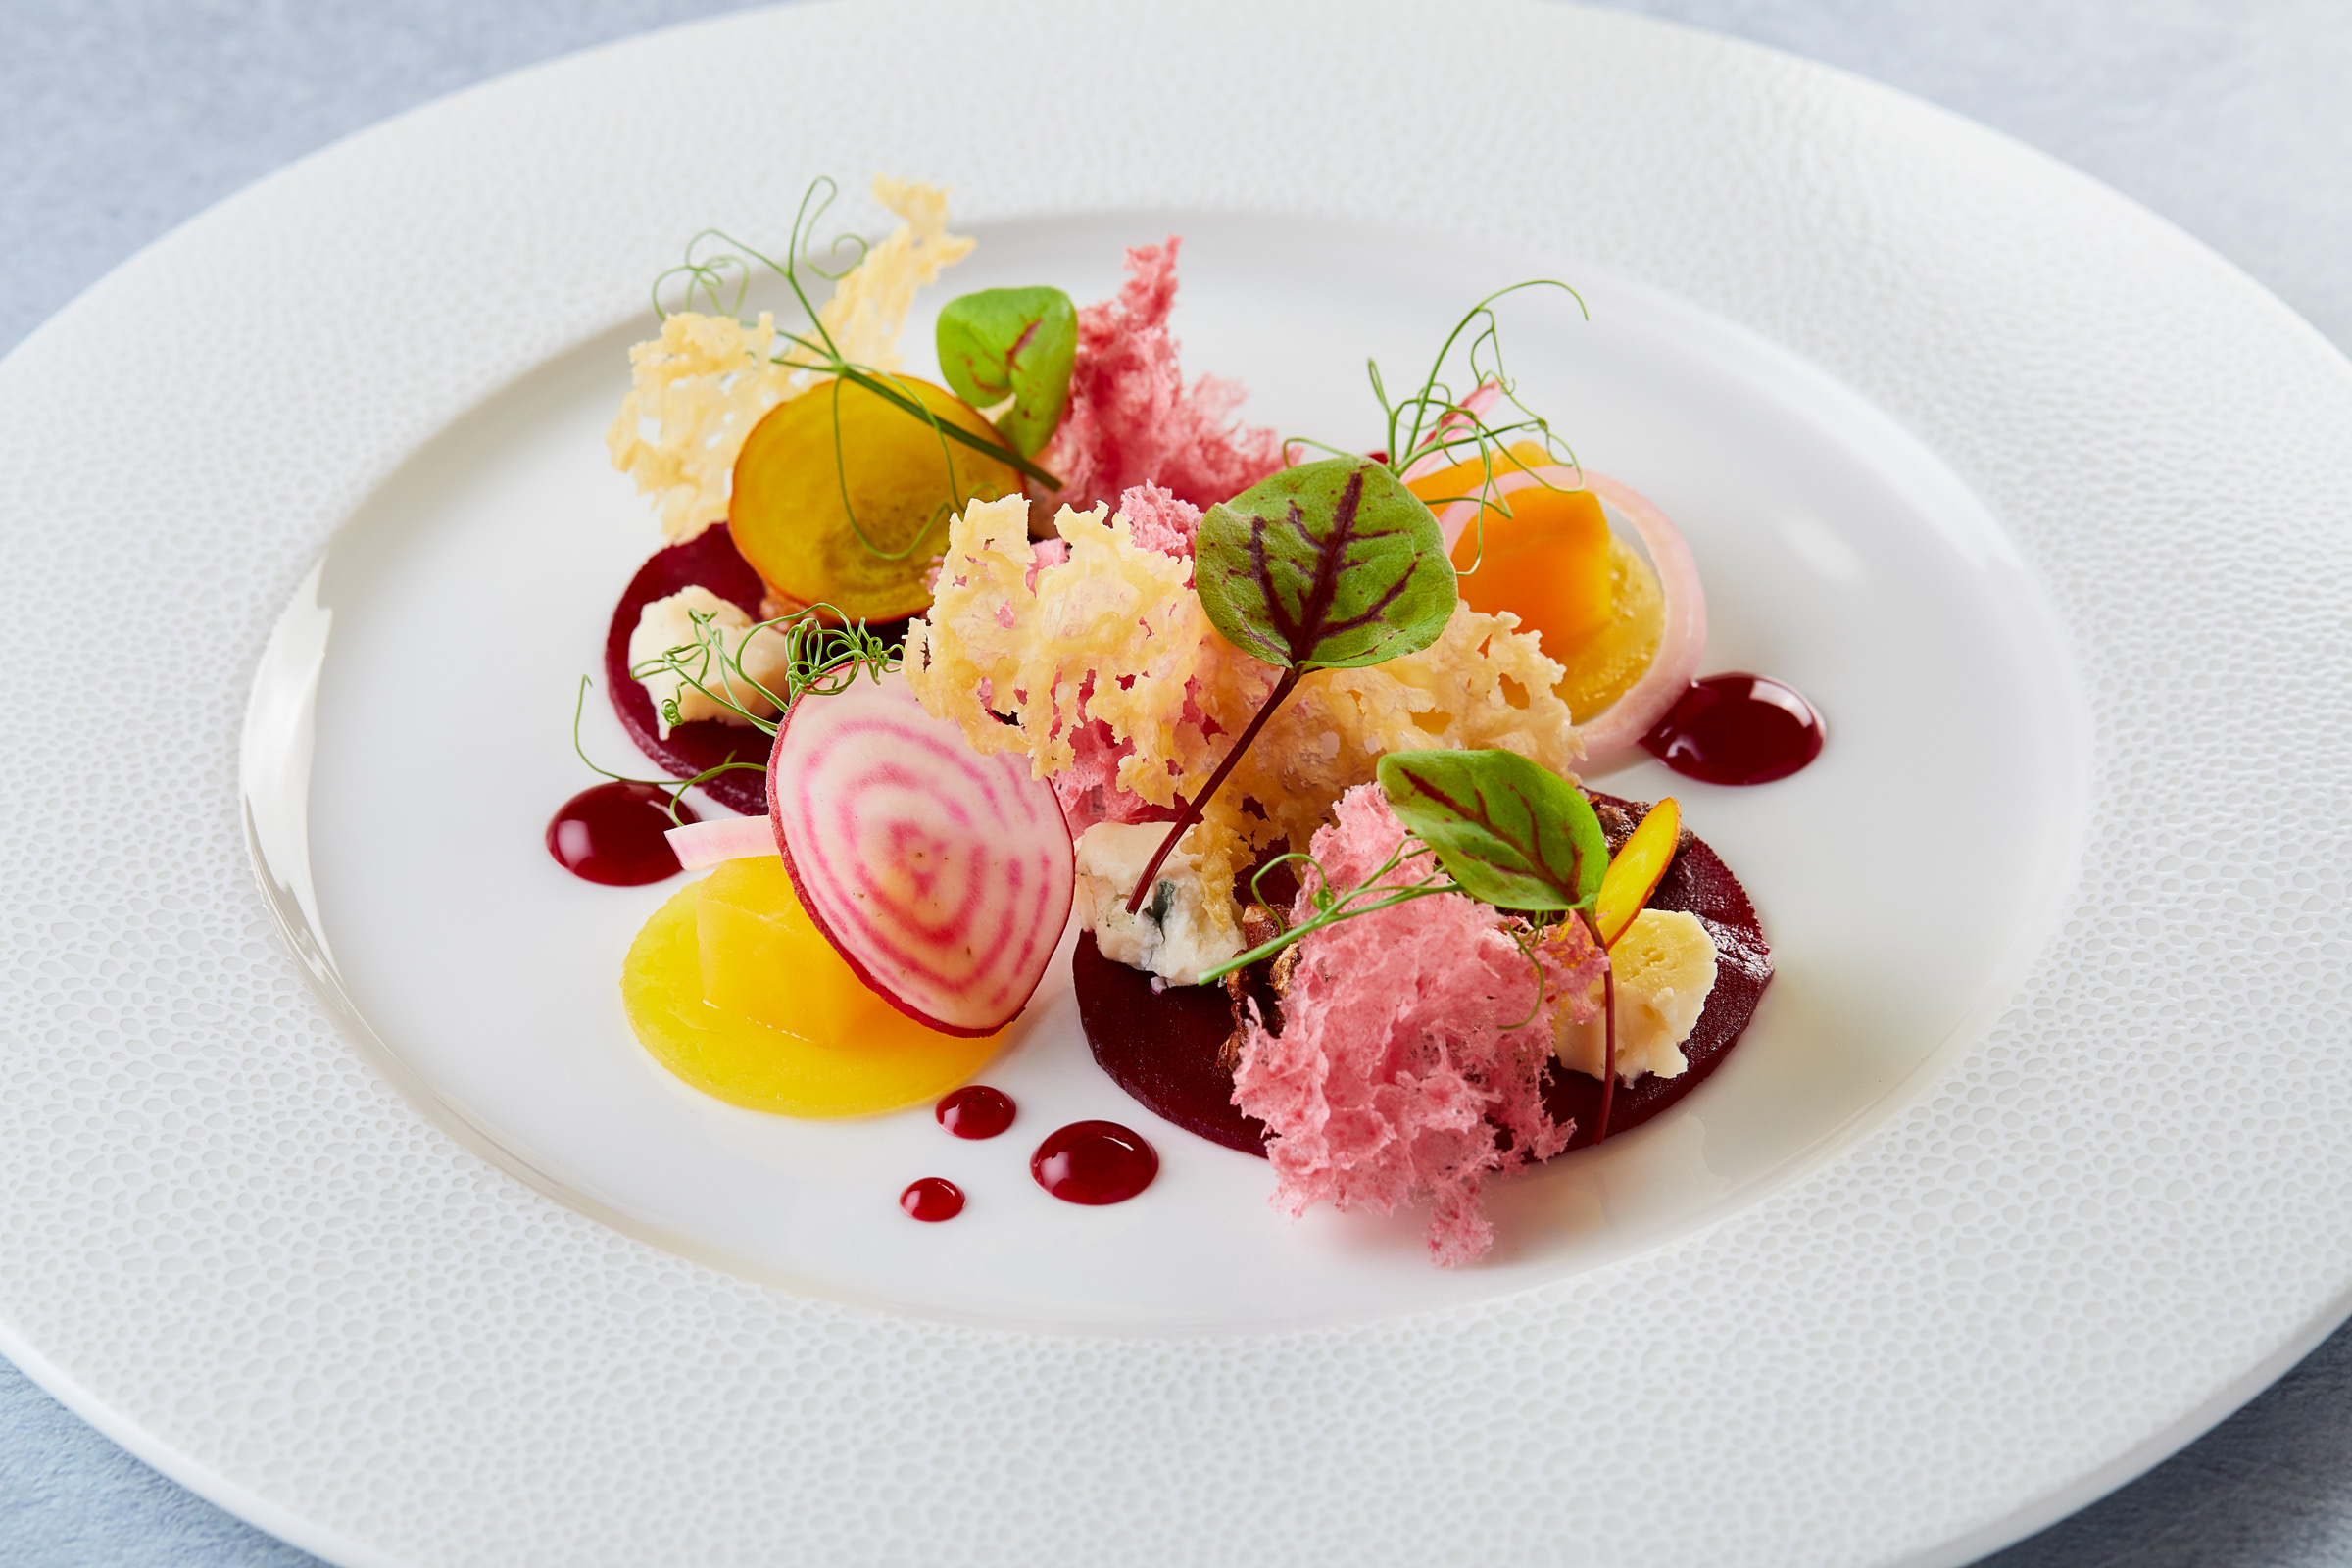 Beets, Walnuts and Lanark Blue cheese at Fingal Hotel, professional food photographer Alastair Ferrier